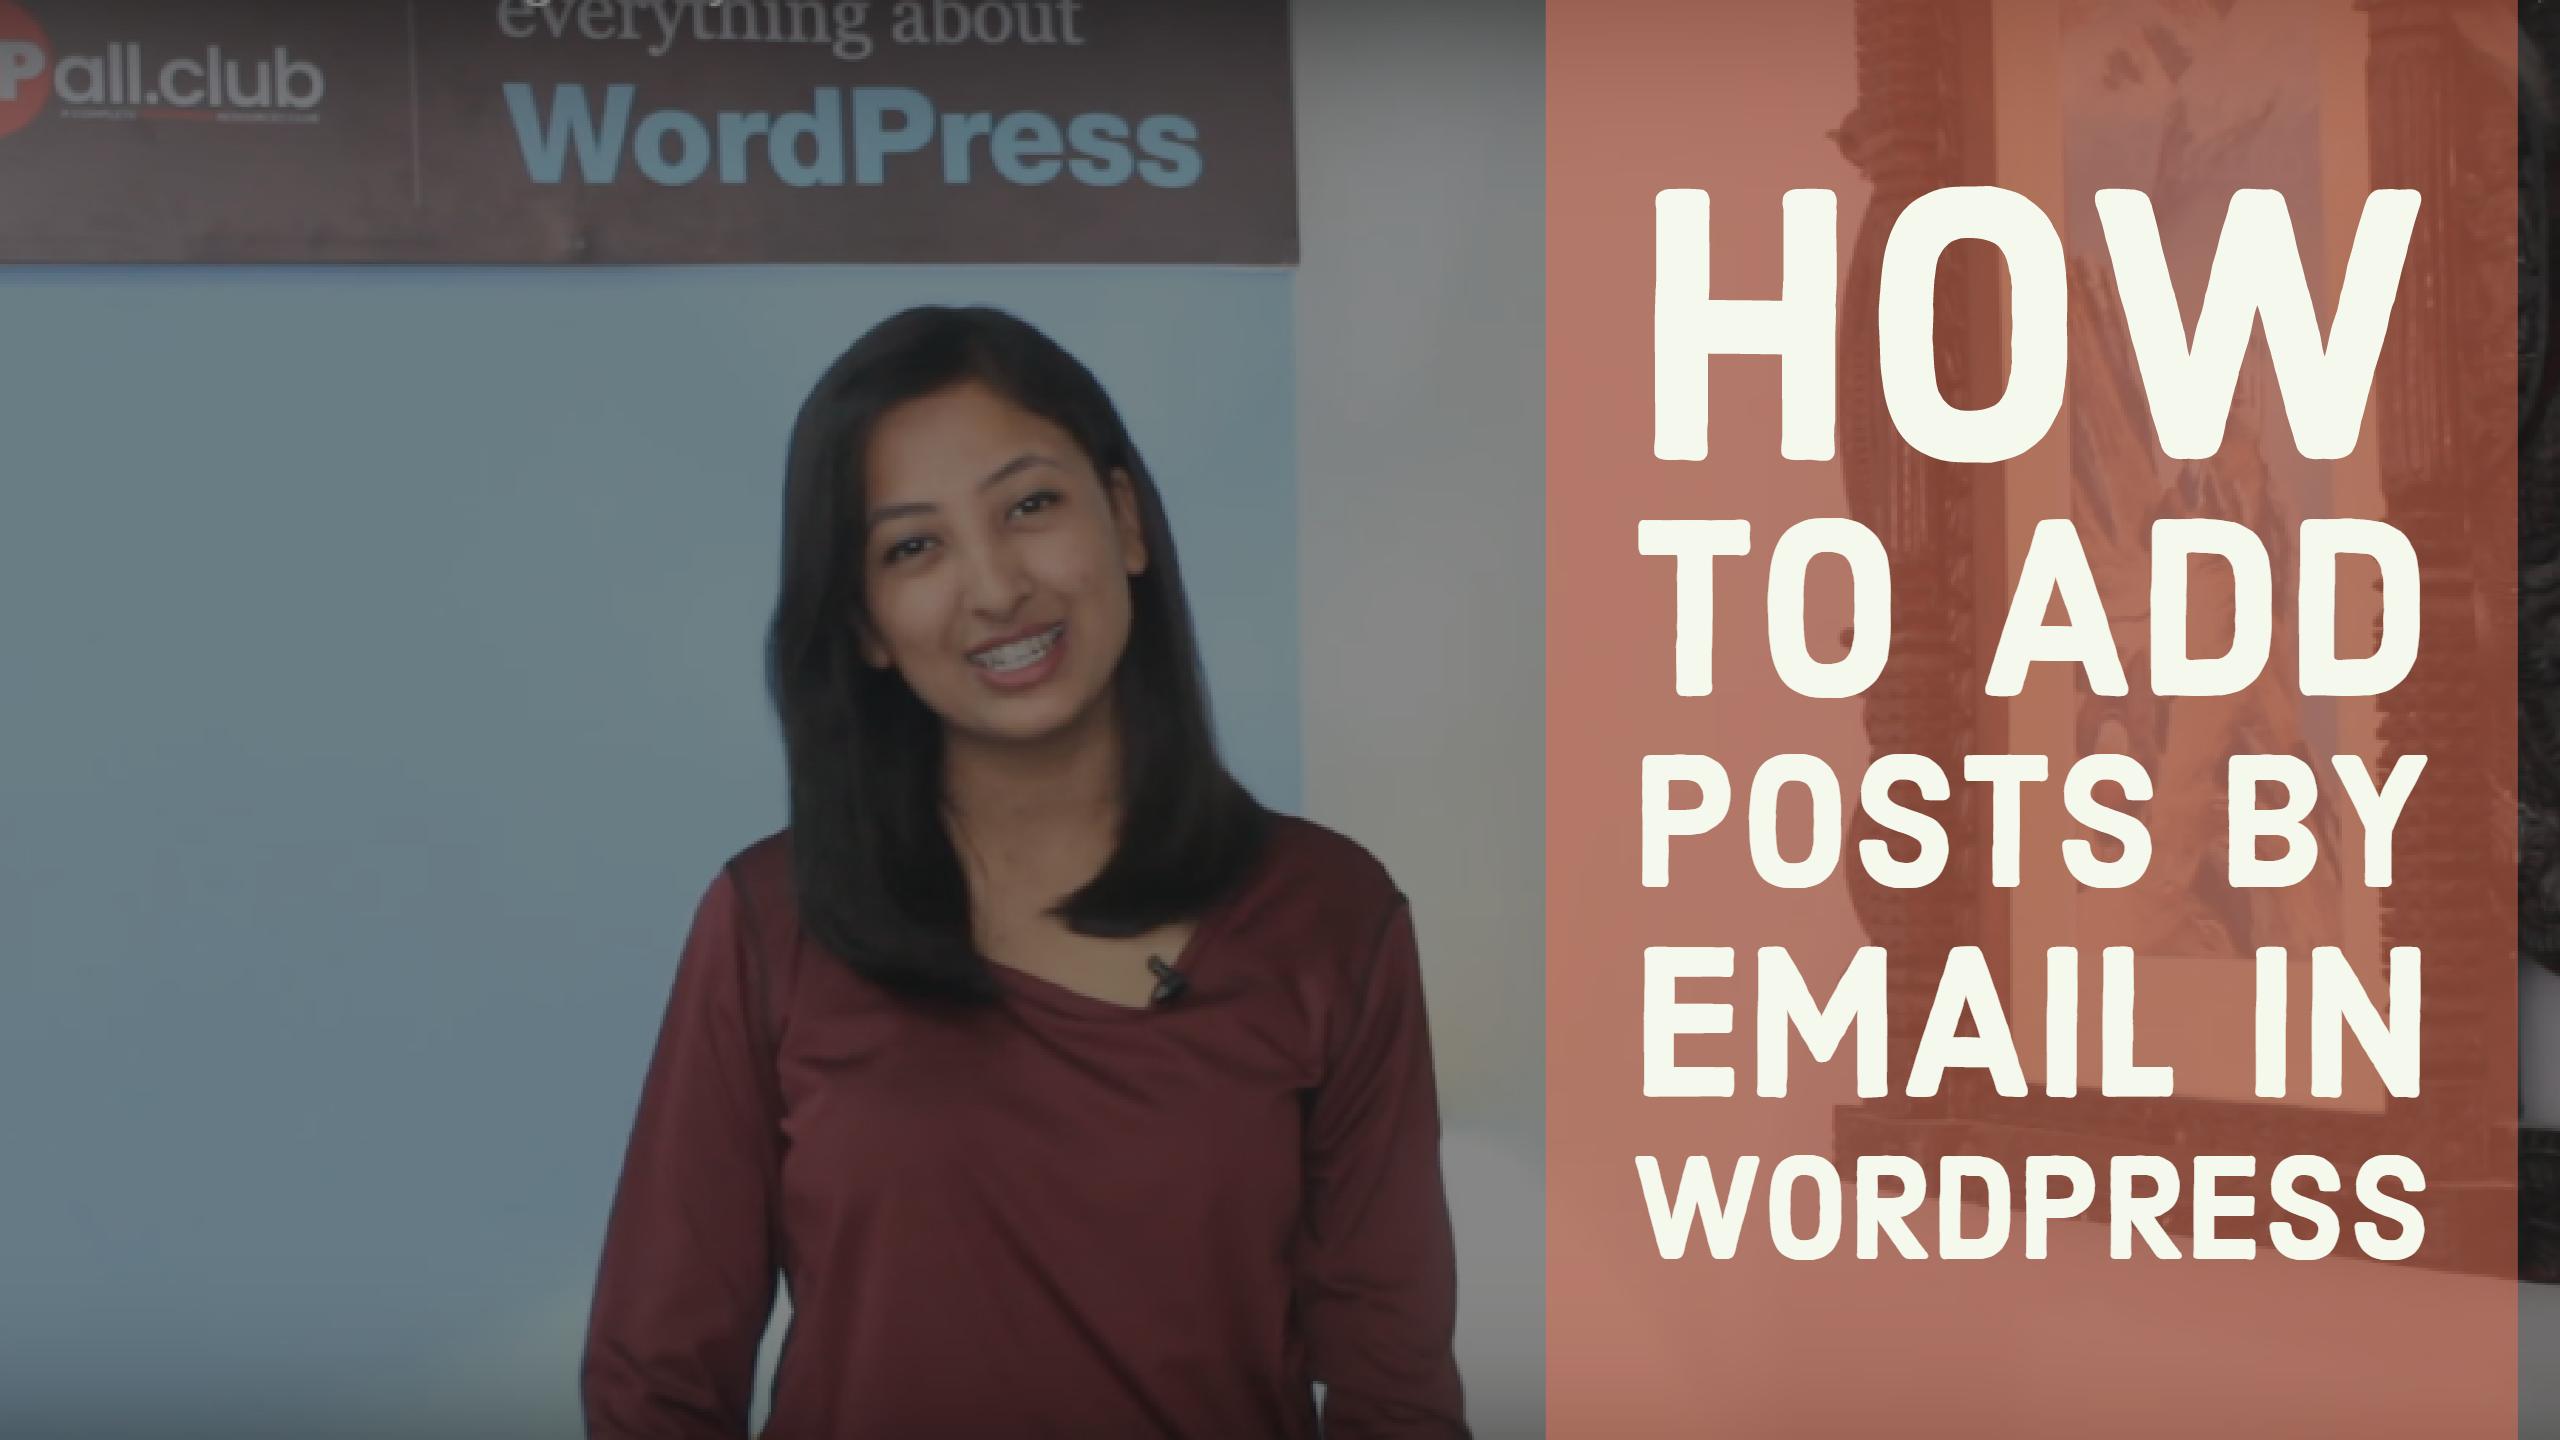 How to add posts by email in WordPress